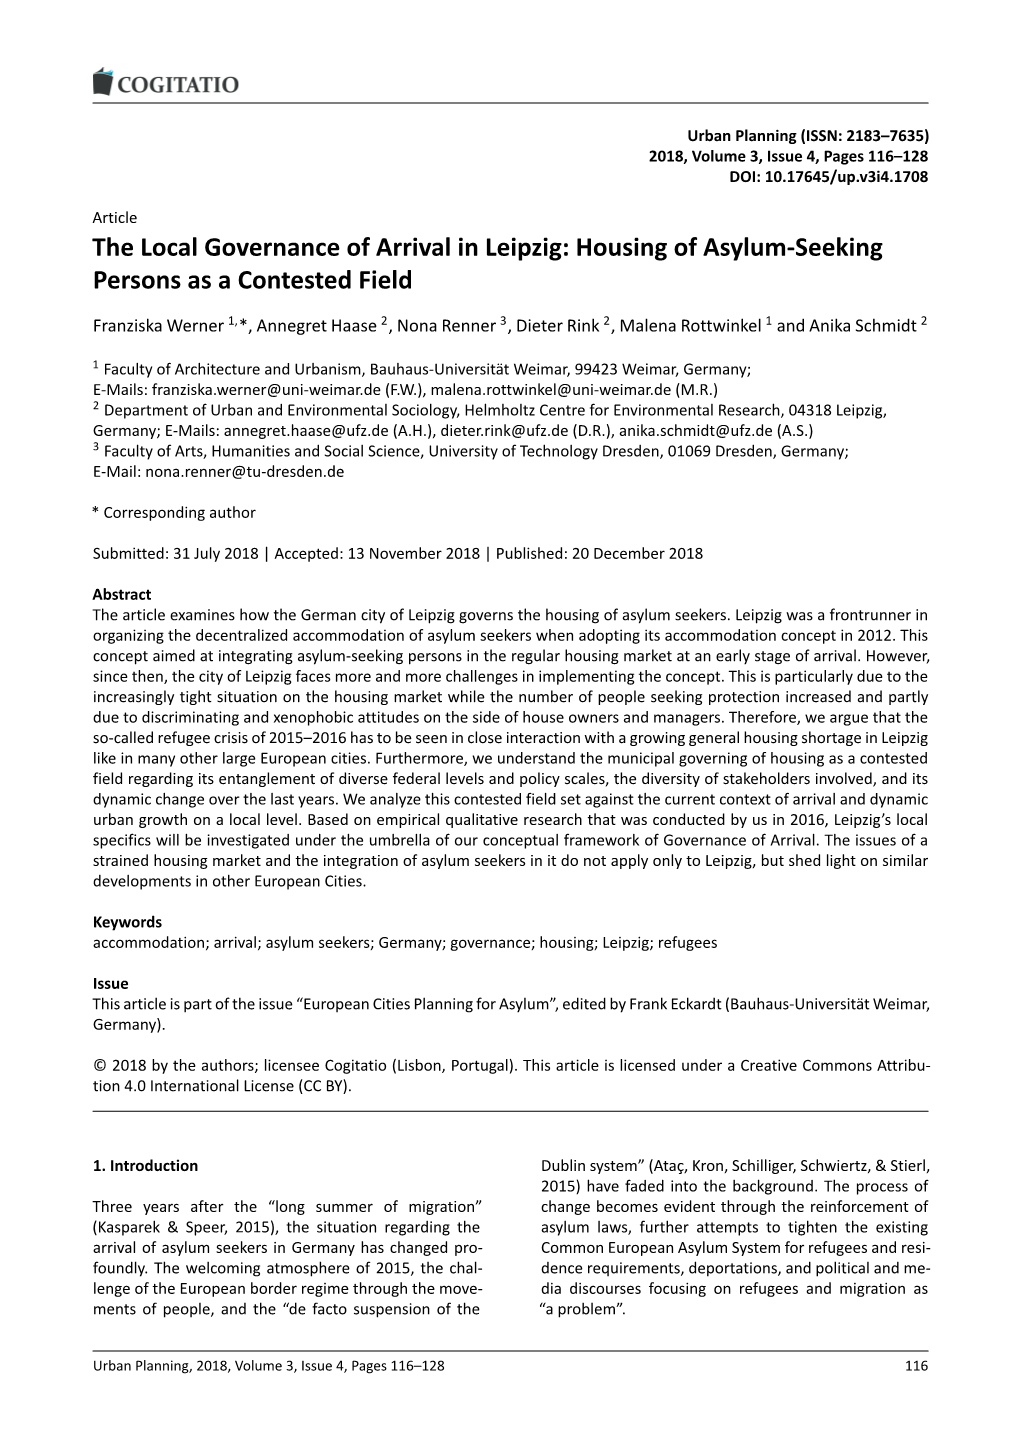 The Local Governance of Arrival in Leipzig: Housing of Asylum-Seeking Persons As a Contested Field